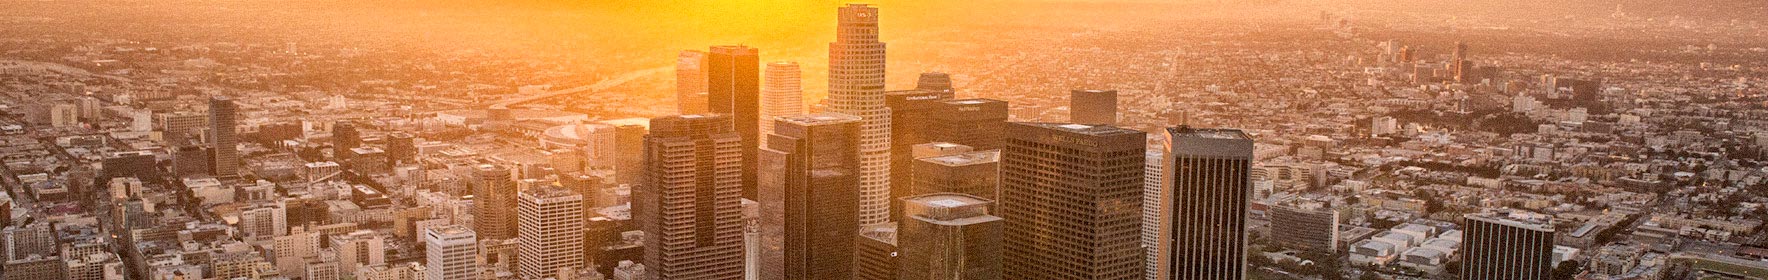 Image of Downtown Los Angeles at sunset